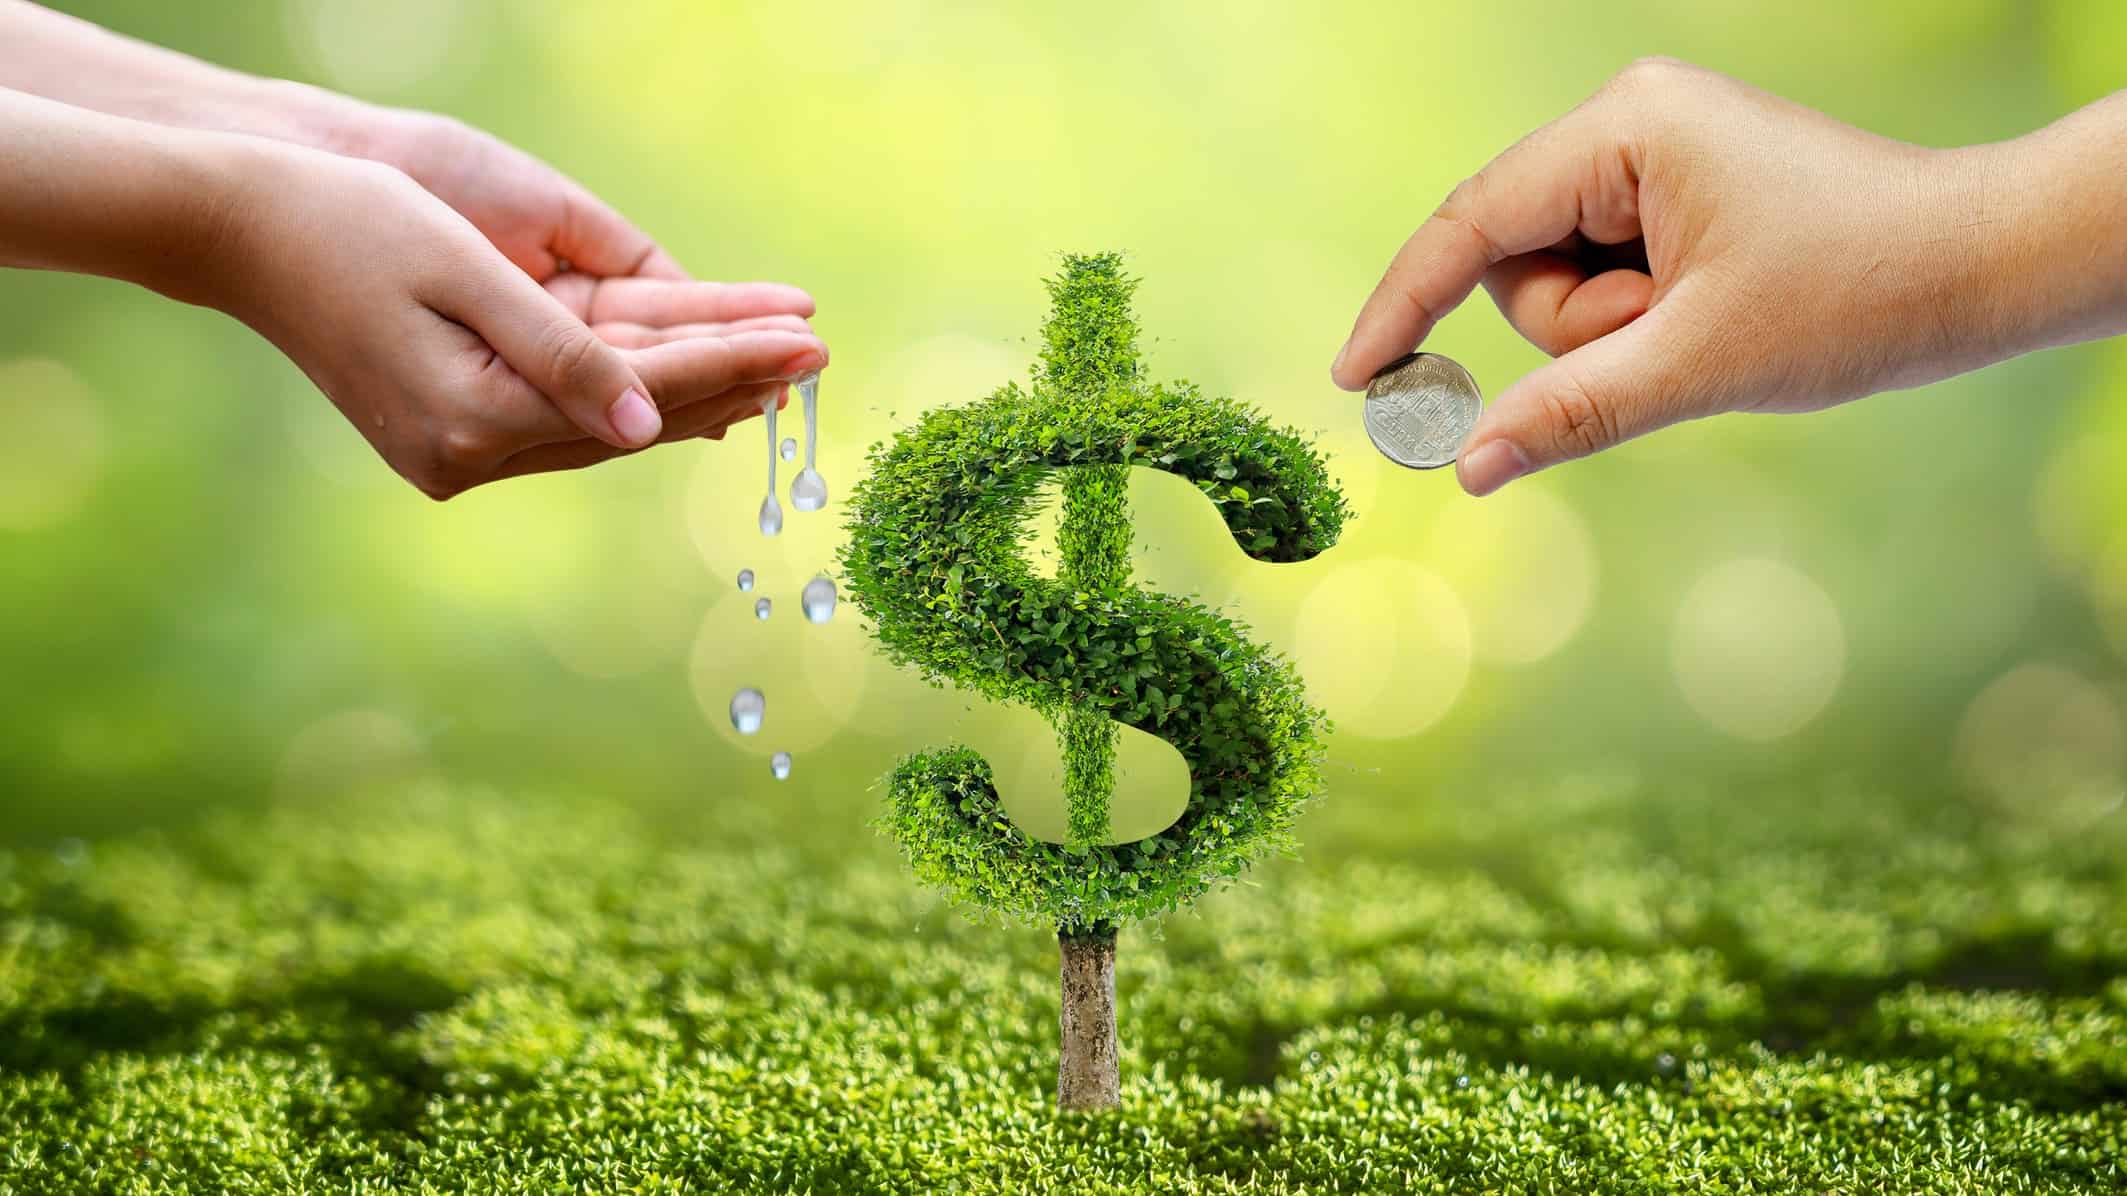 Dollar sign made from grass growing from ground as one person drips water on it and another holds coin